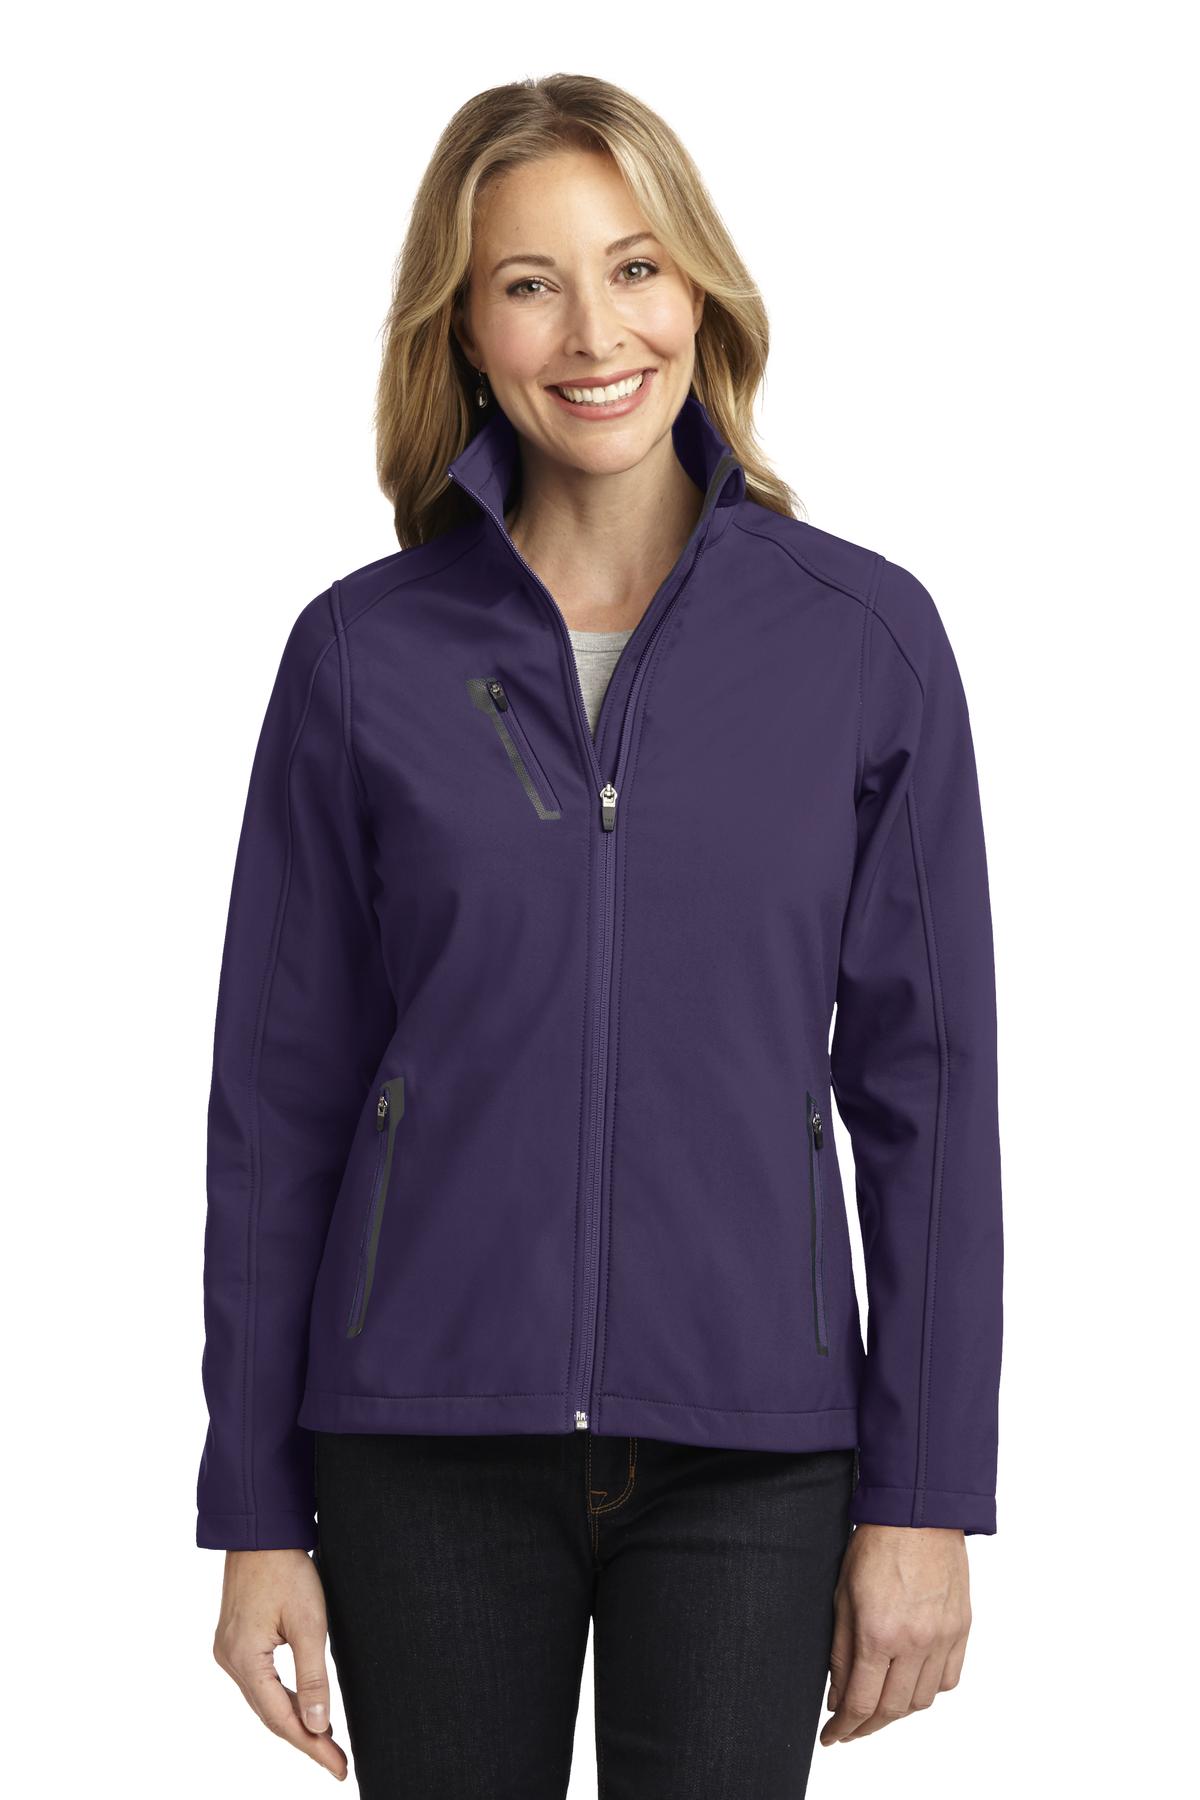 Just Blanks Port Authority L324 Ladies Welded Soft Shell Jacket ...